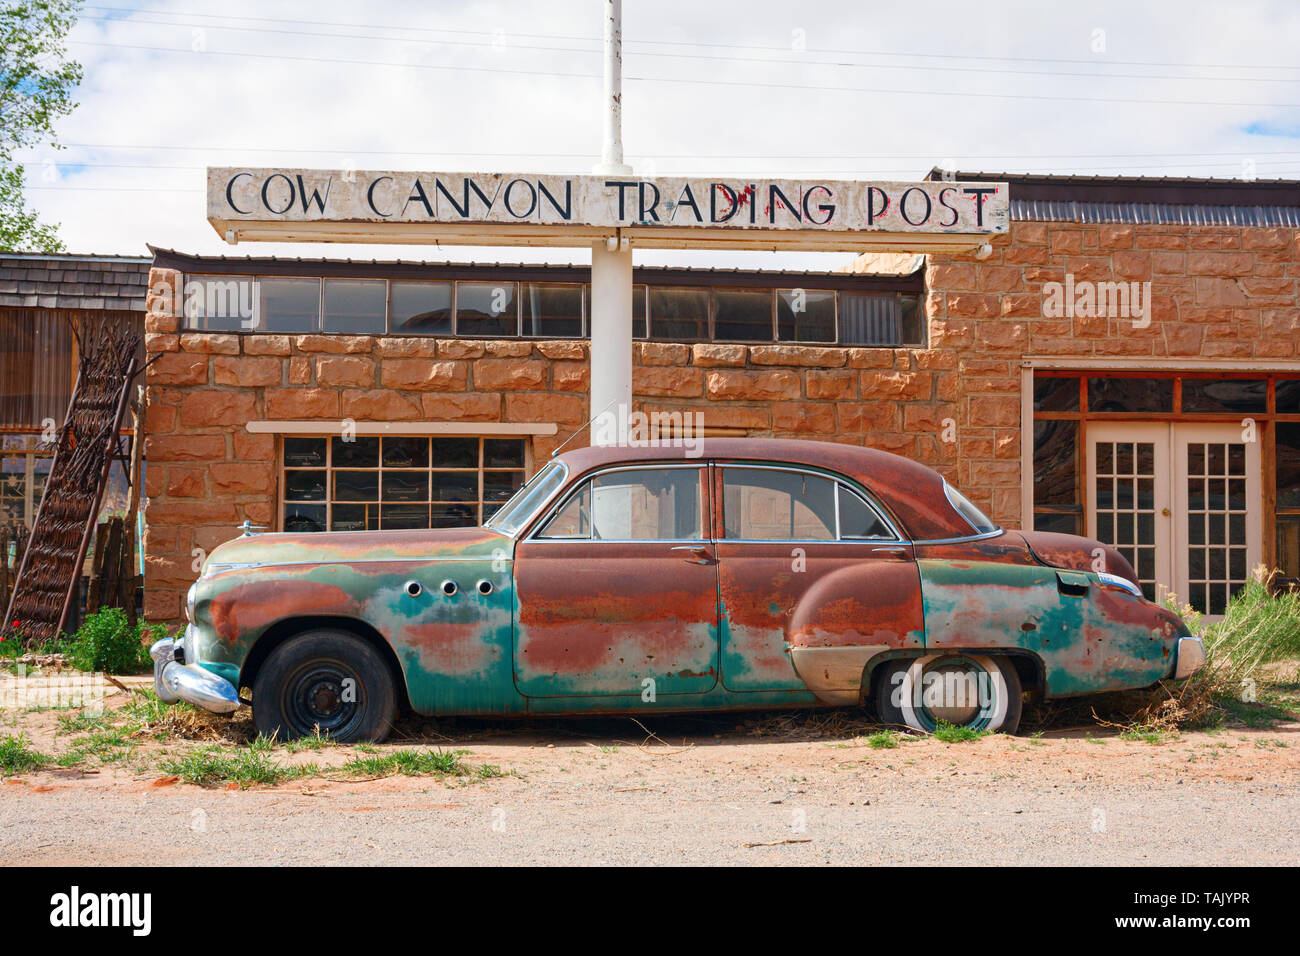 BLUFF, UTAH, USA - APRIL 17, 2013: Old, rusty 1949 Buick Super car parked in front of the Cow Canyon Trading Post building along the U.S. Route 191 un Stock Photo